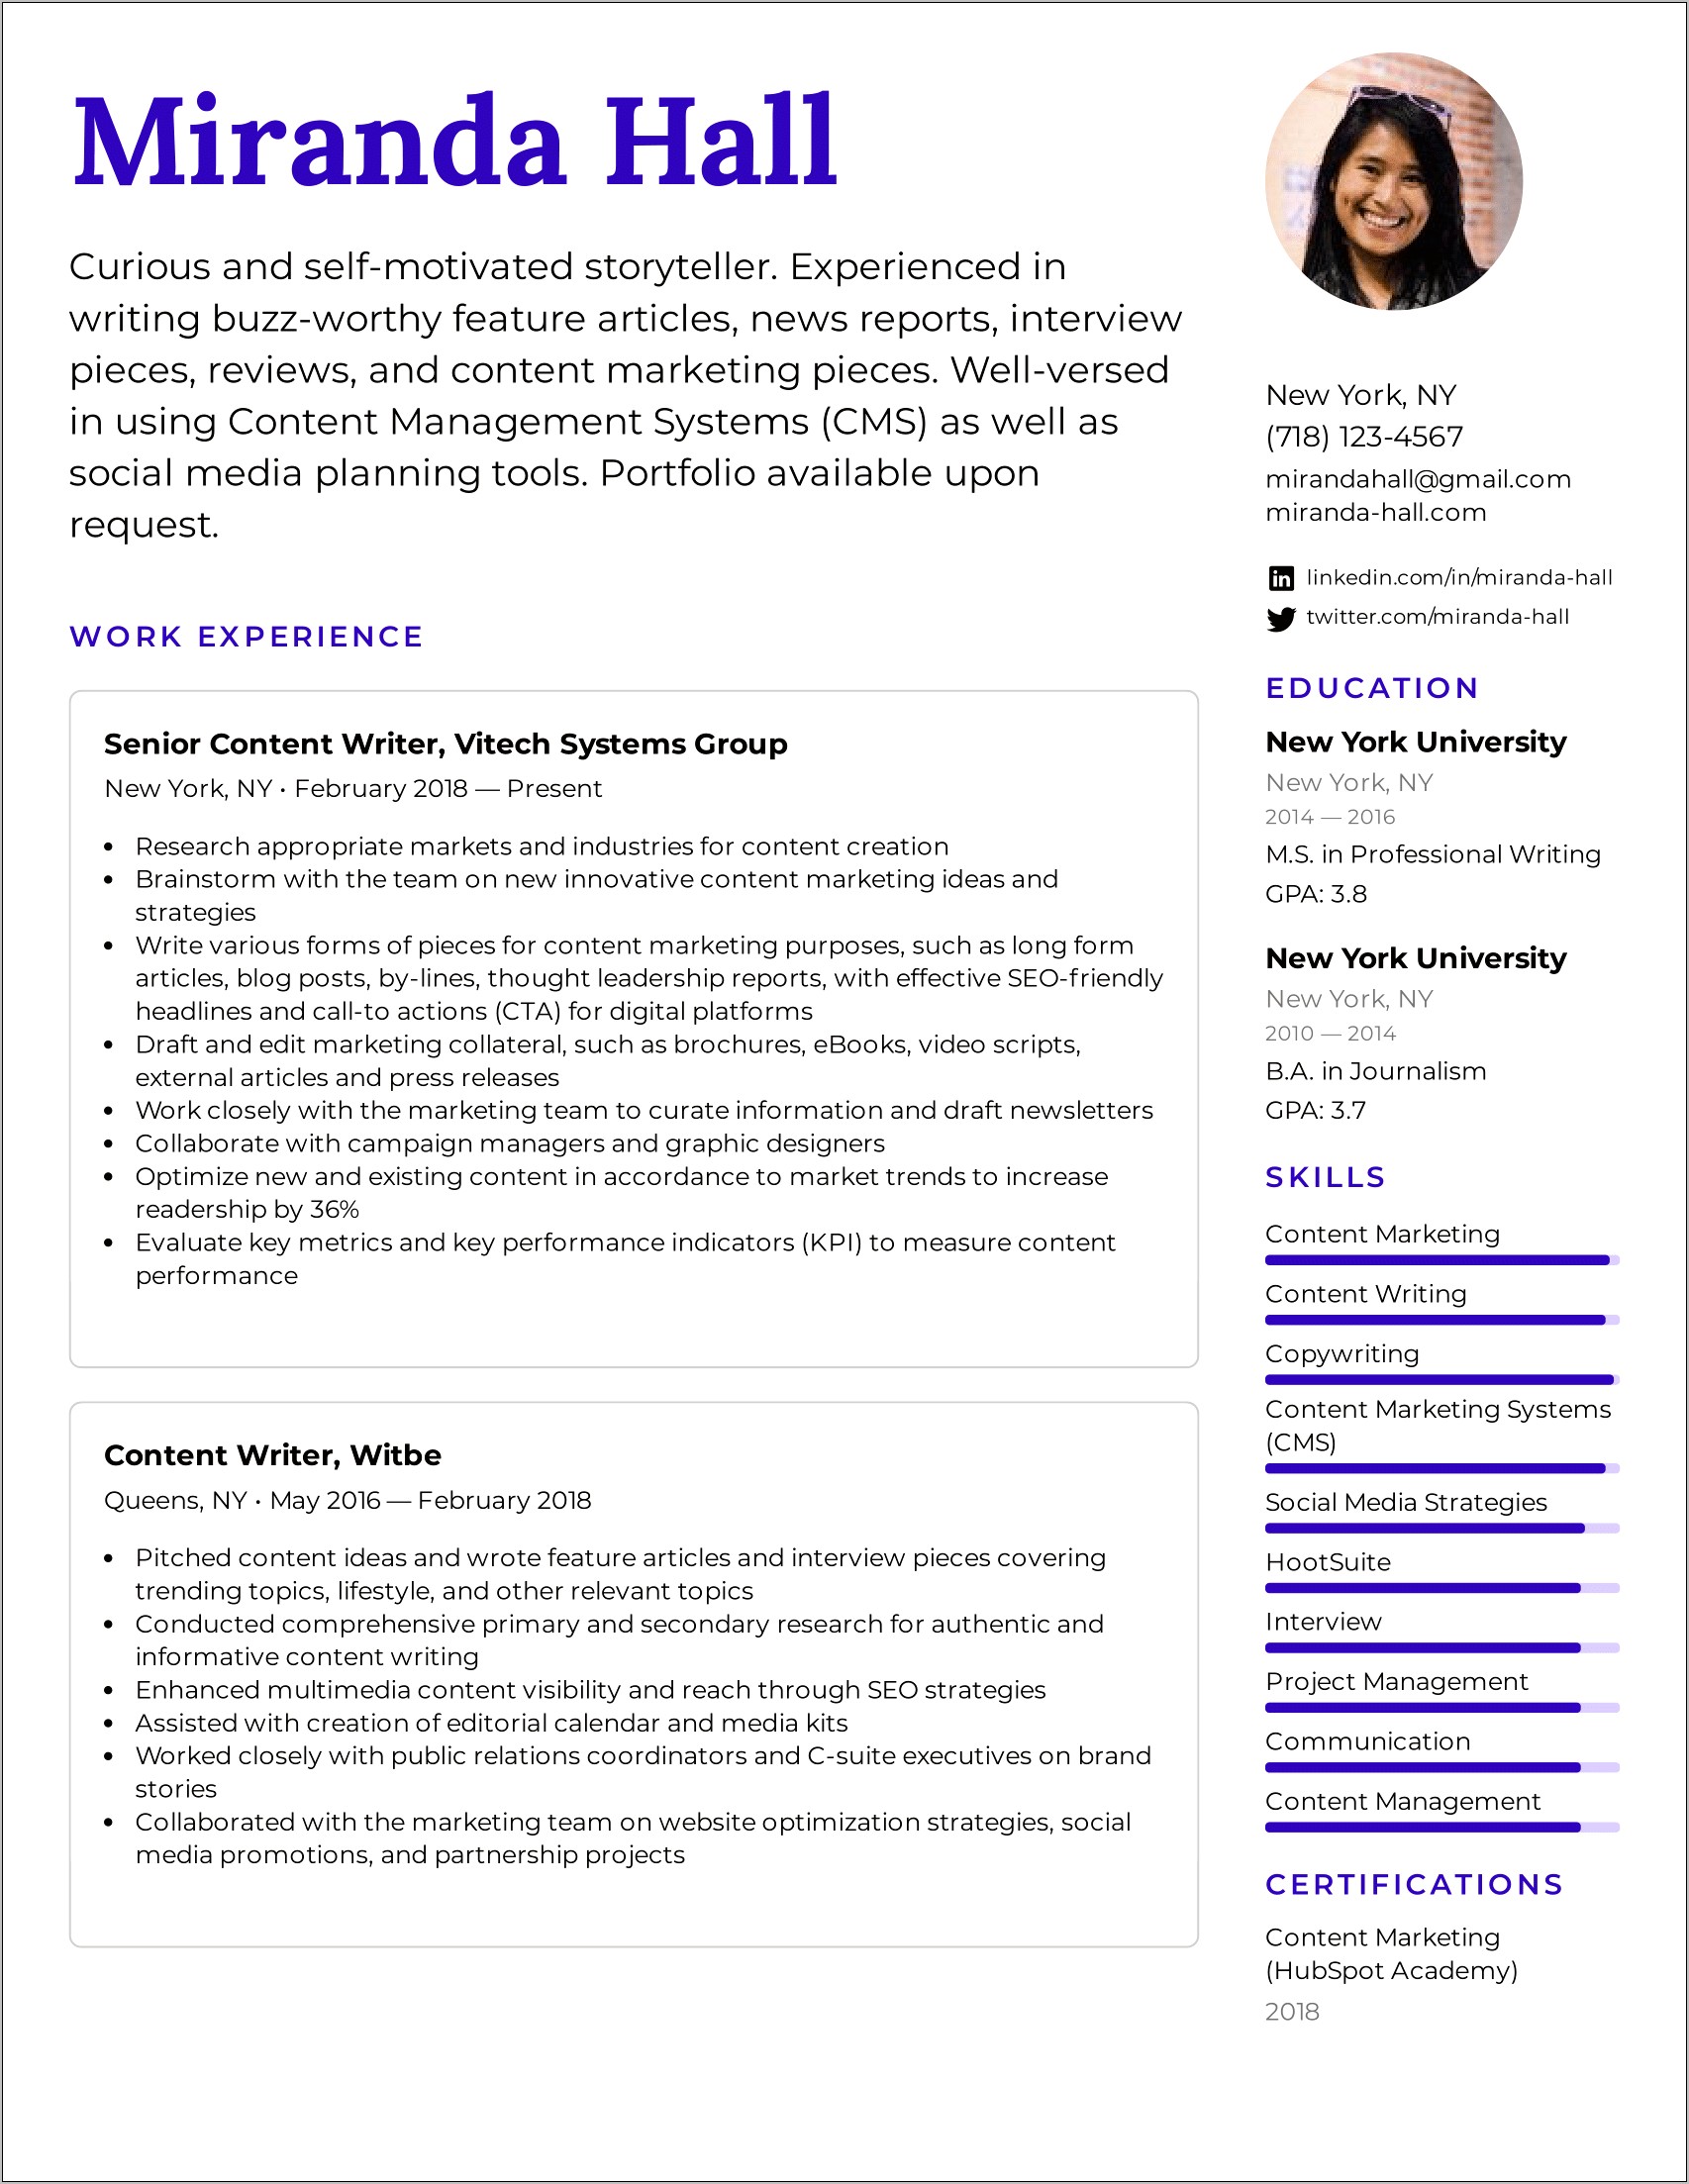 Seo Resume But No Work Experience